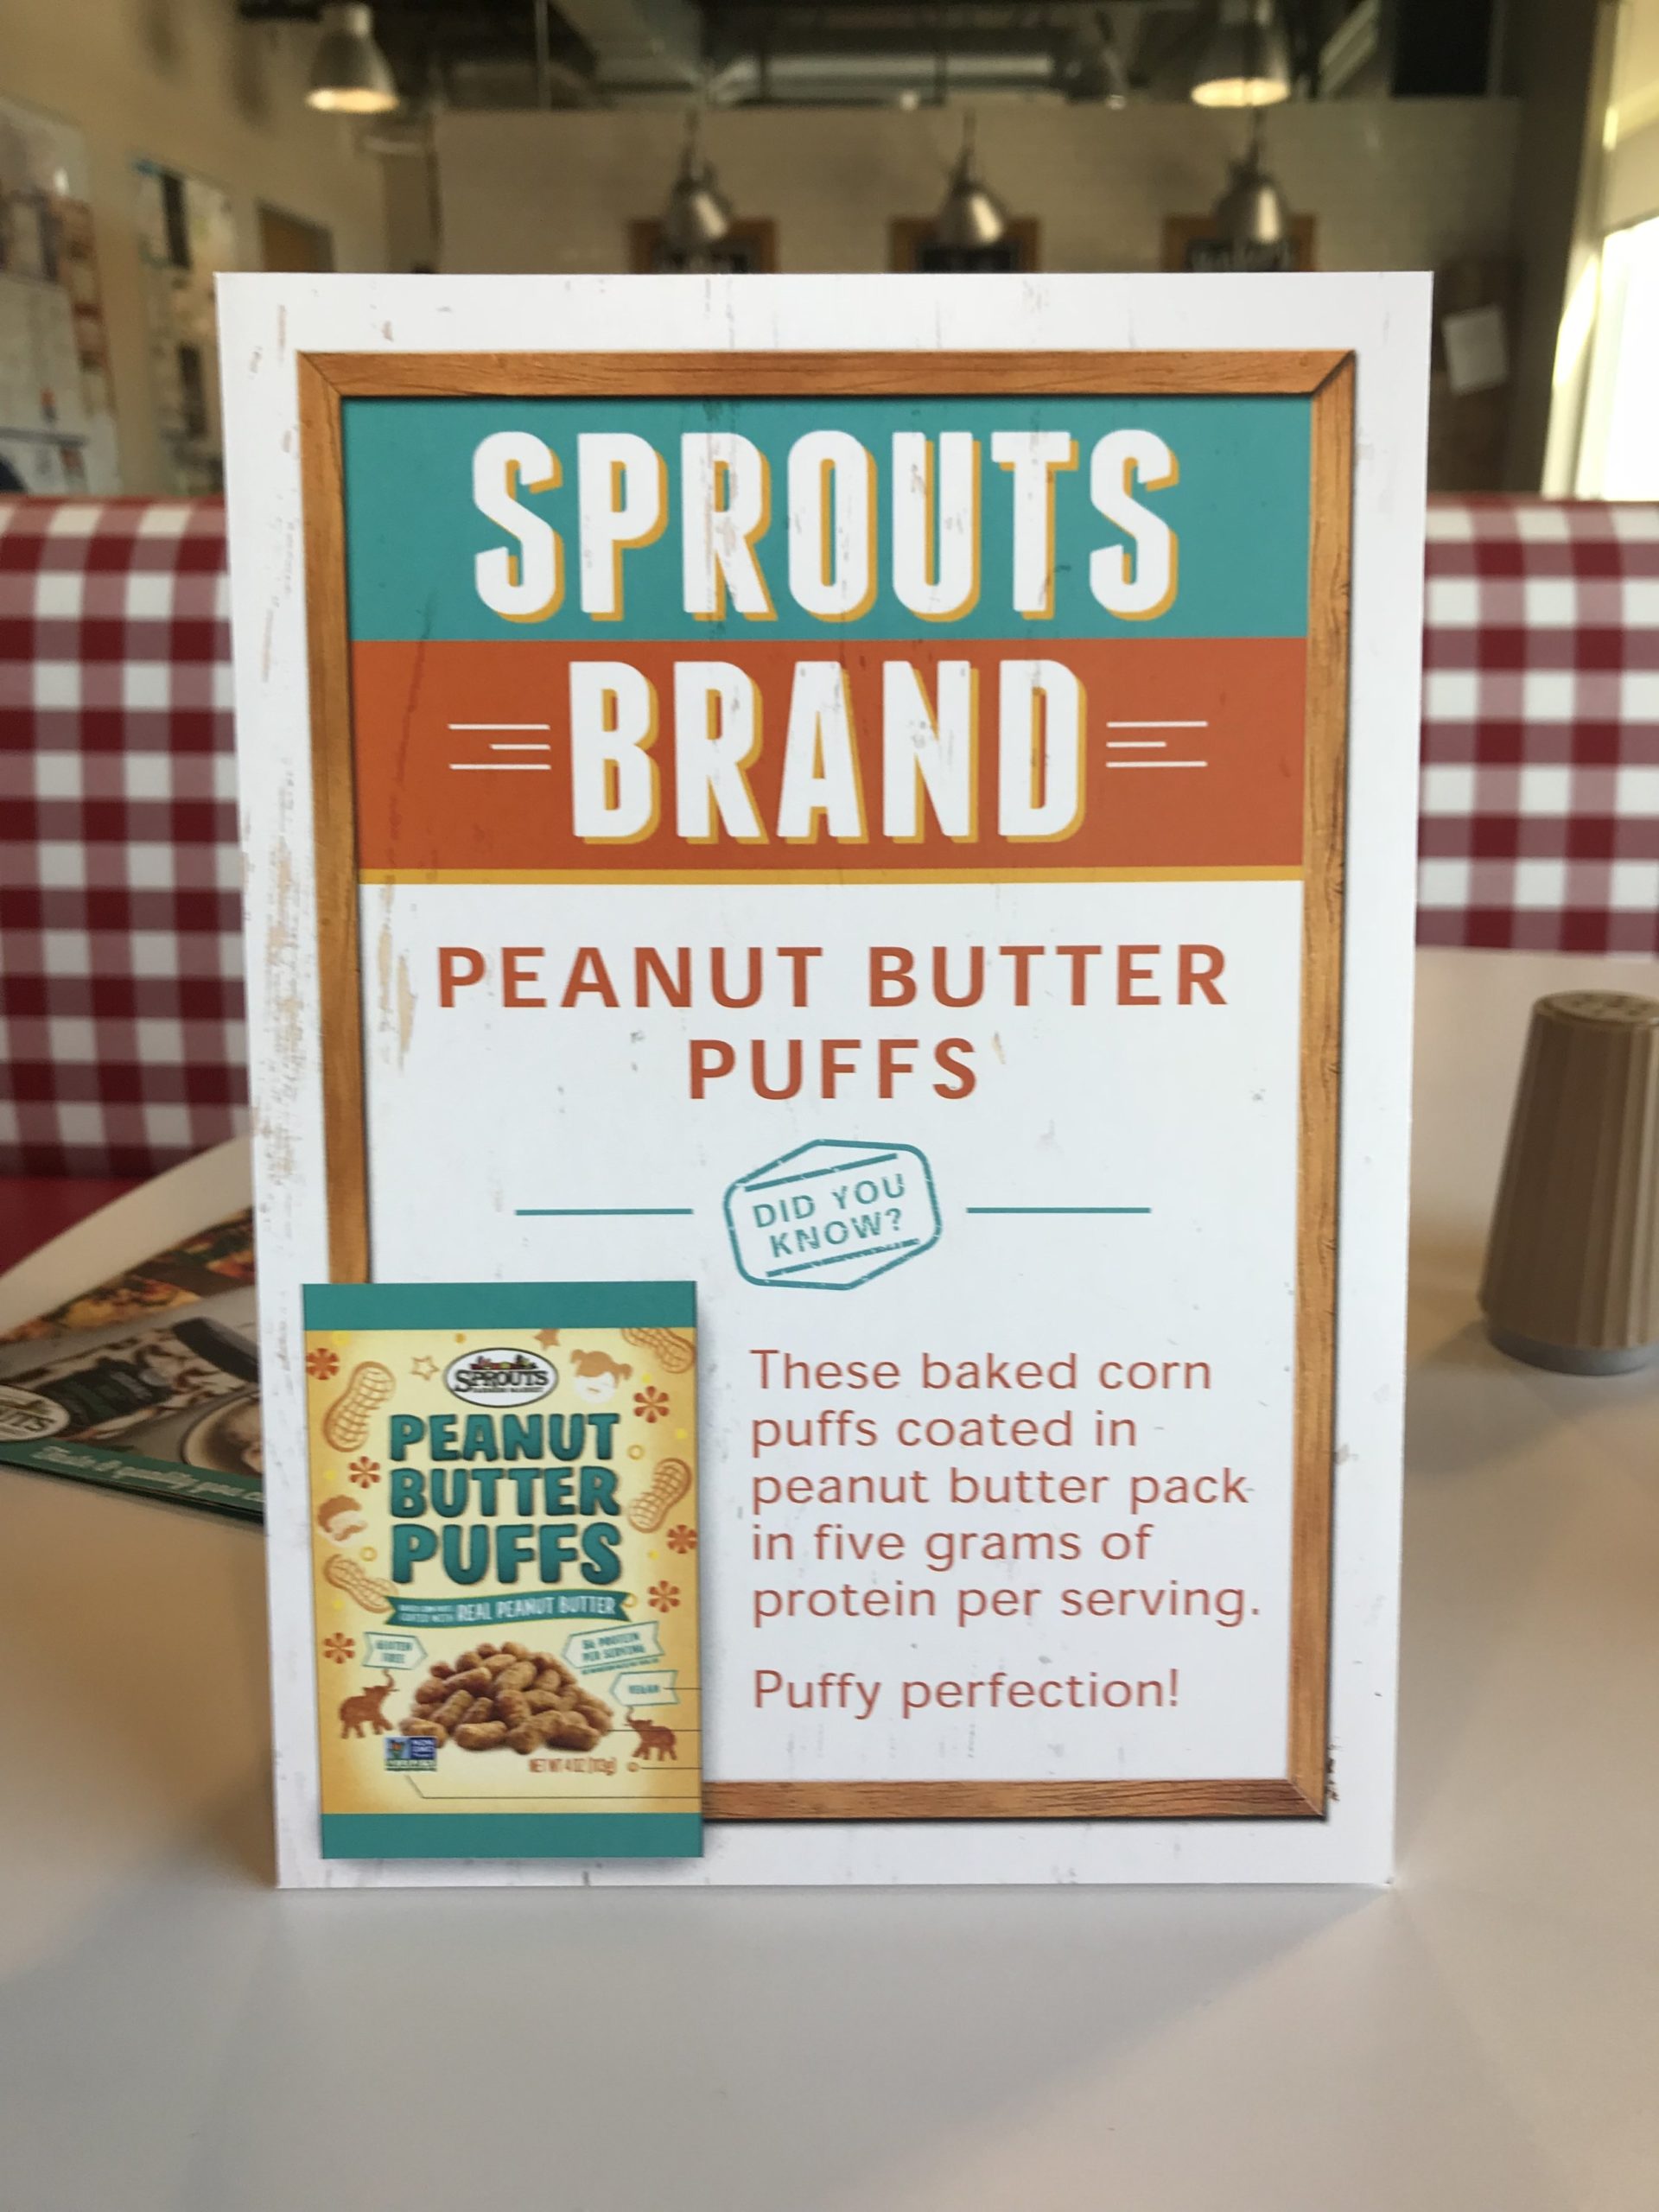  These new Sprouts brand PB puffs were amazing and packed 5g of protein per serving! 